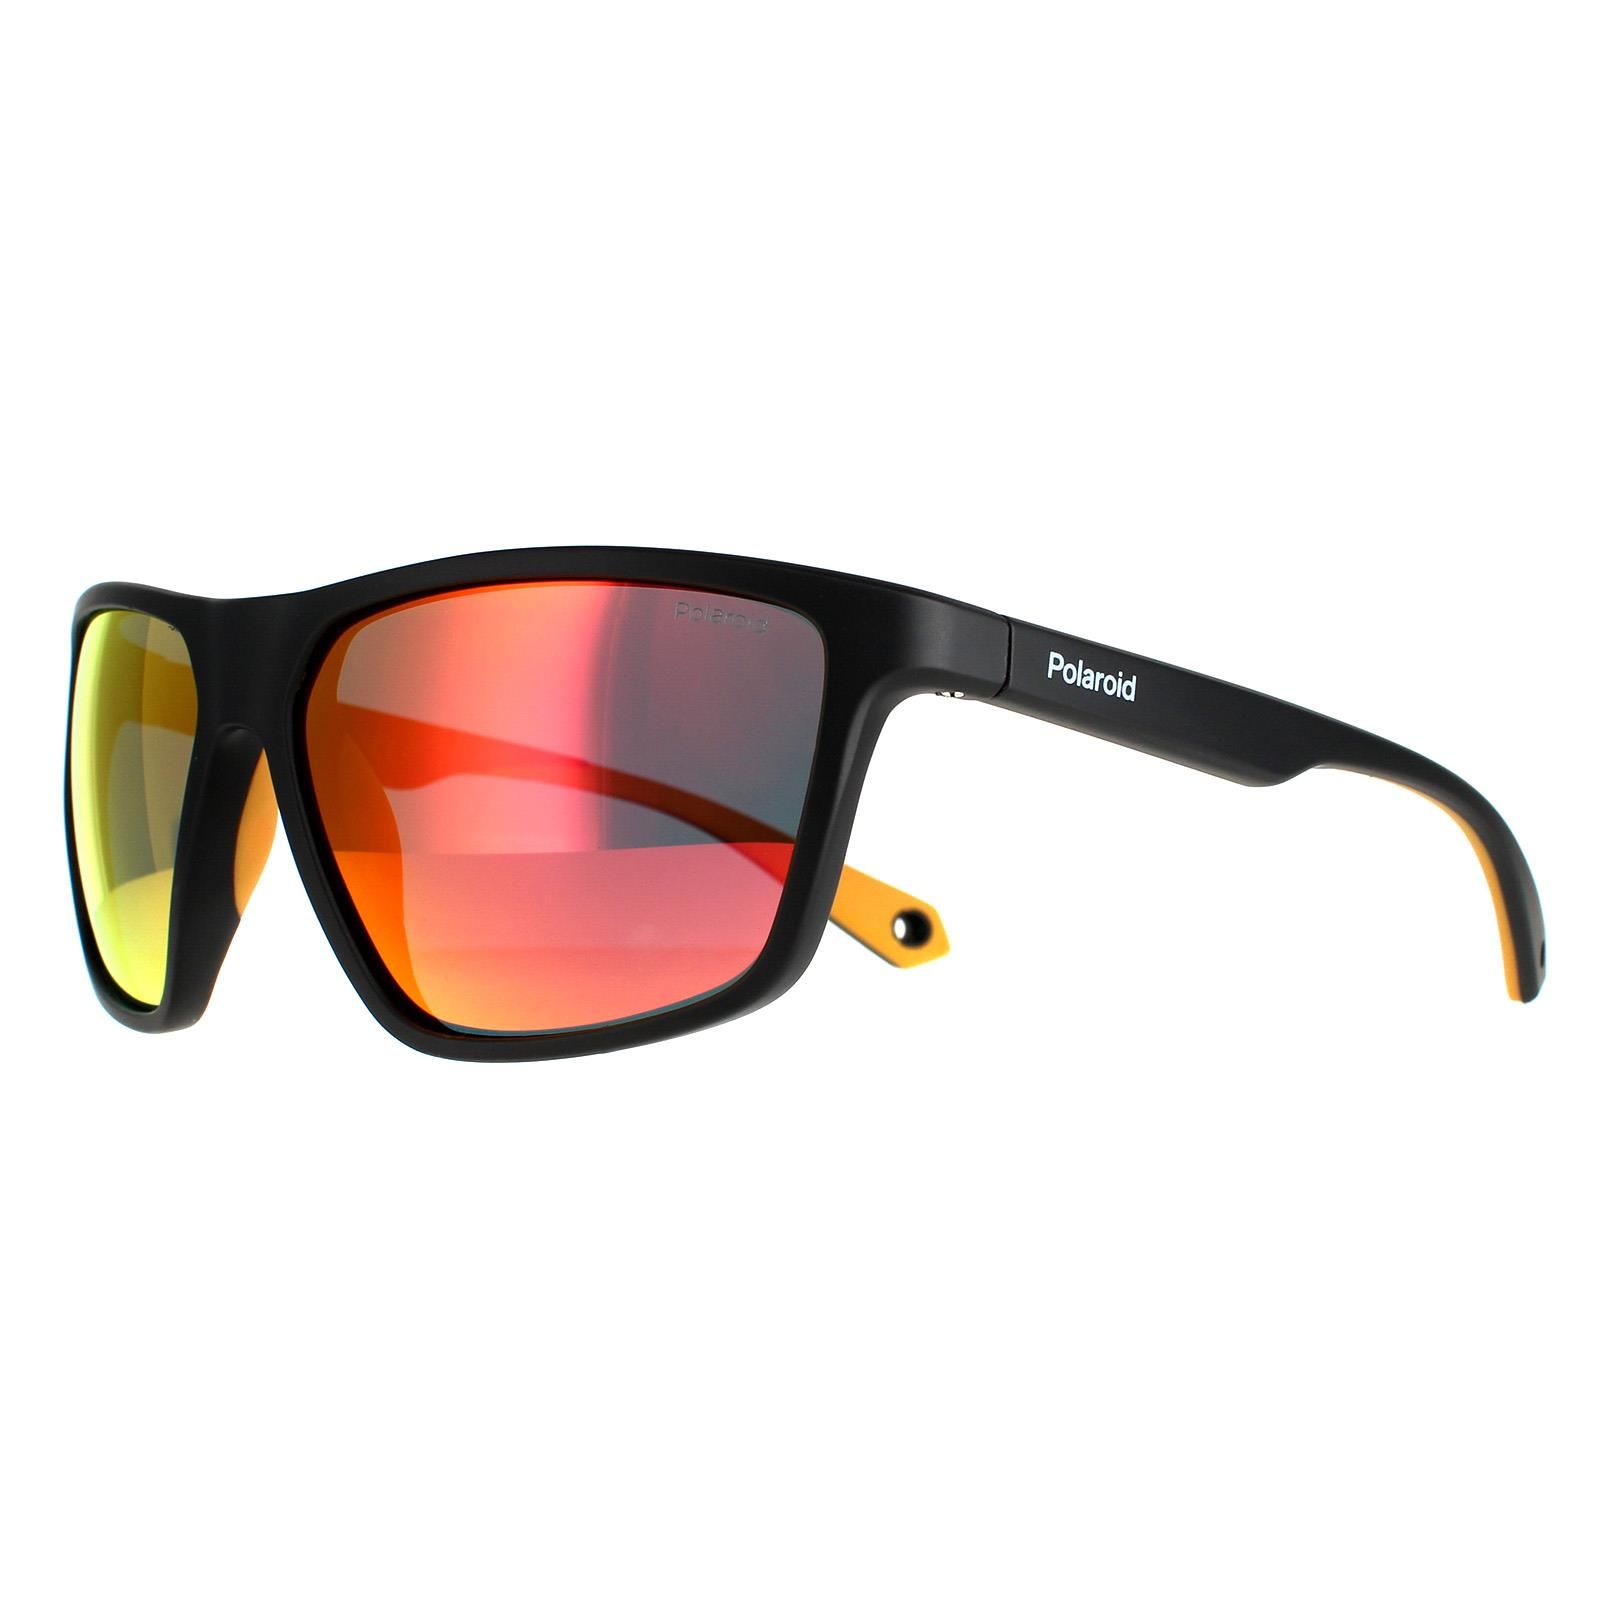 Polaroid Wrap Mens Black Yellow Red Mirror Polarized PLD 7040/S  Polaroid are a sporty wrap around style made from lightweight plastic with Polaroid branding on the temples and a strap removable strap to hold the sunglasses in place.